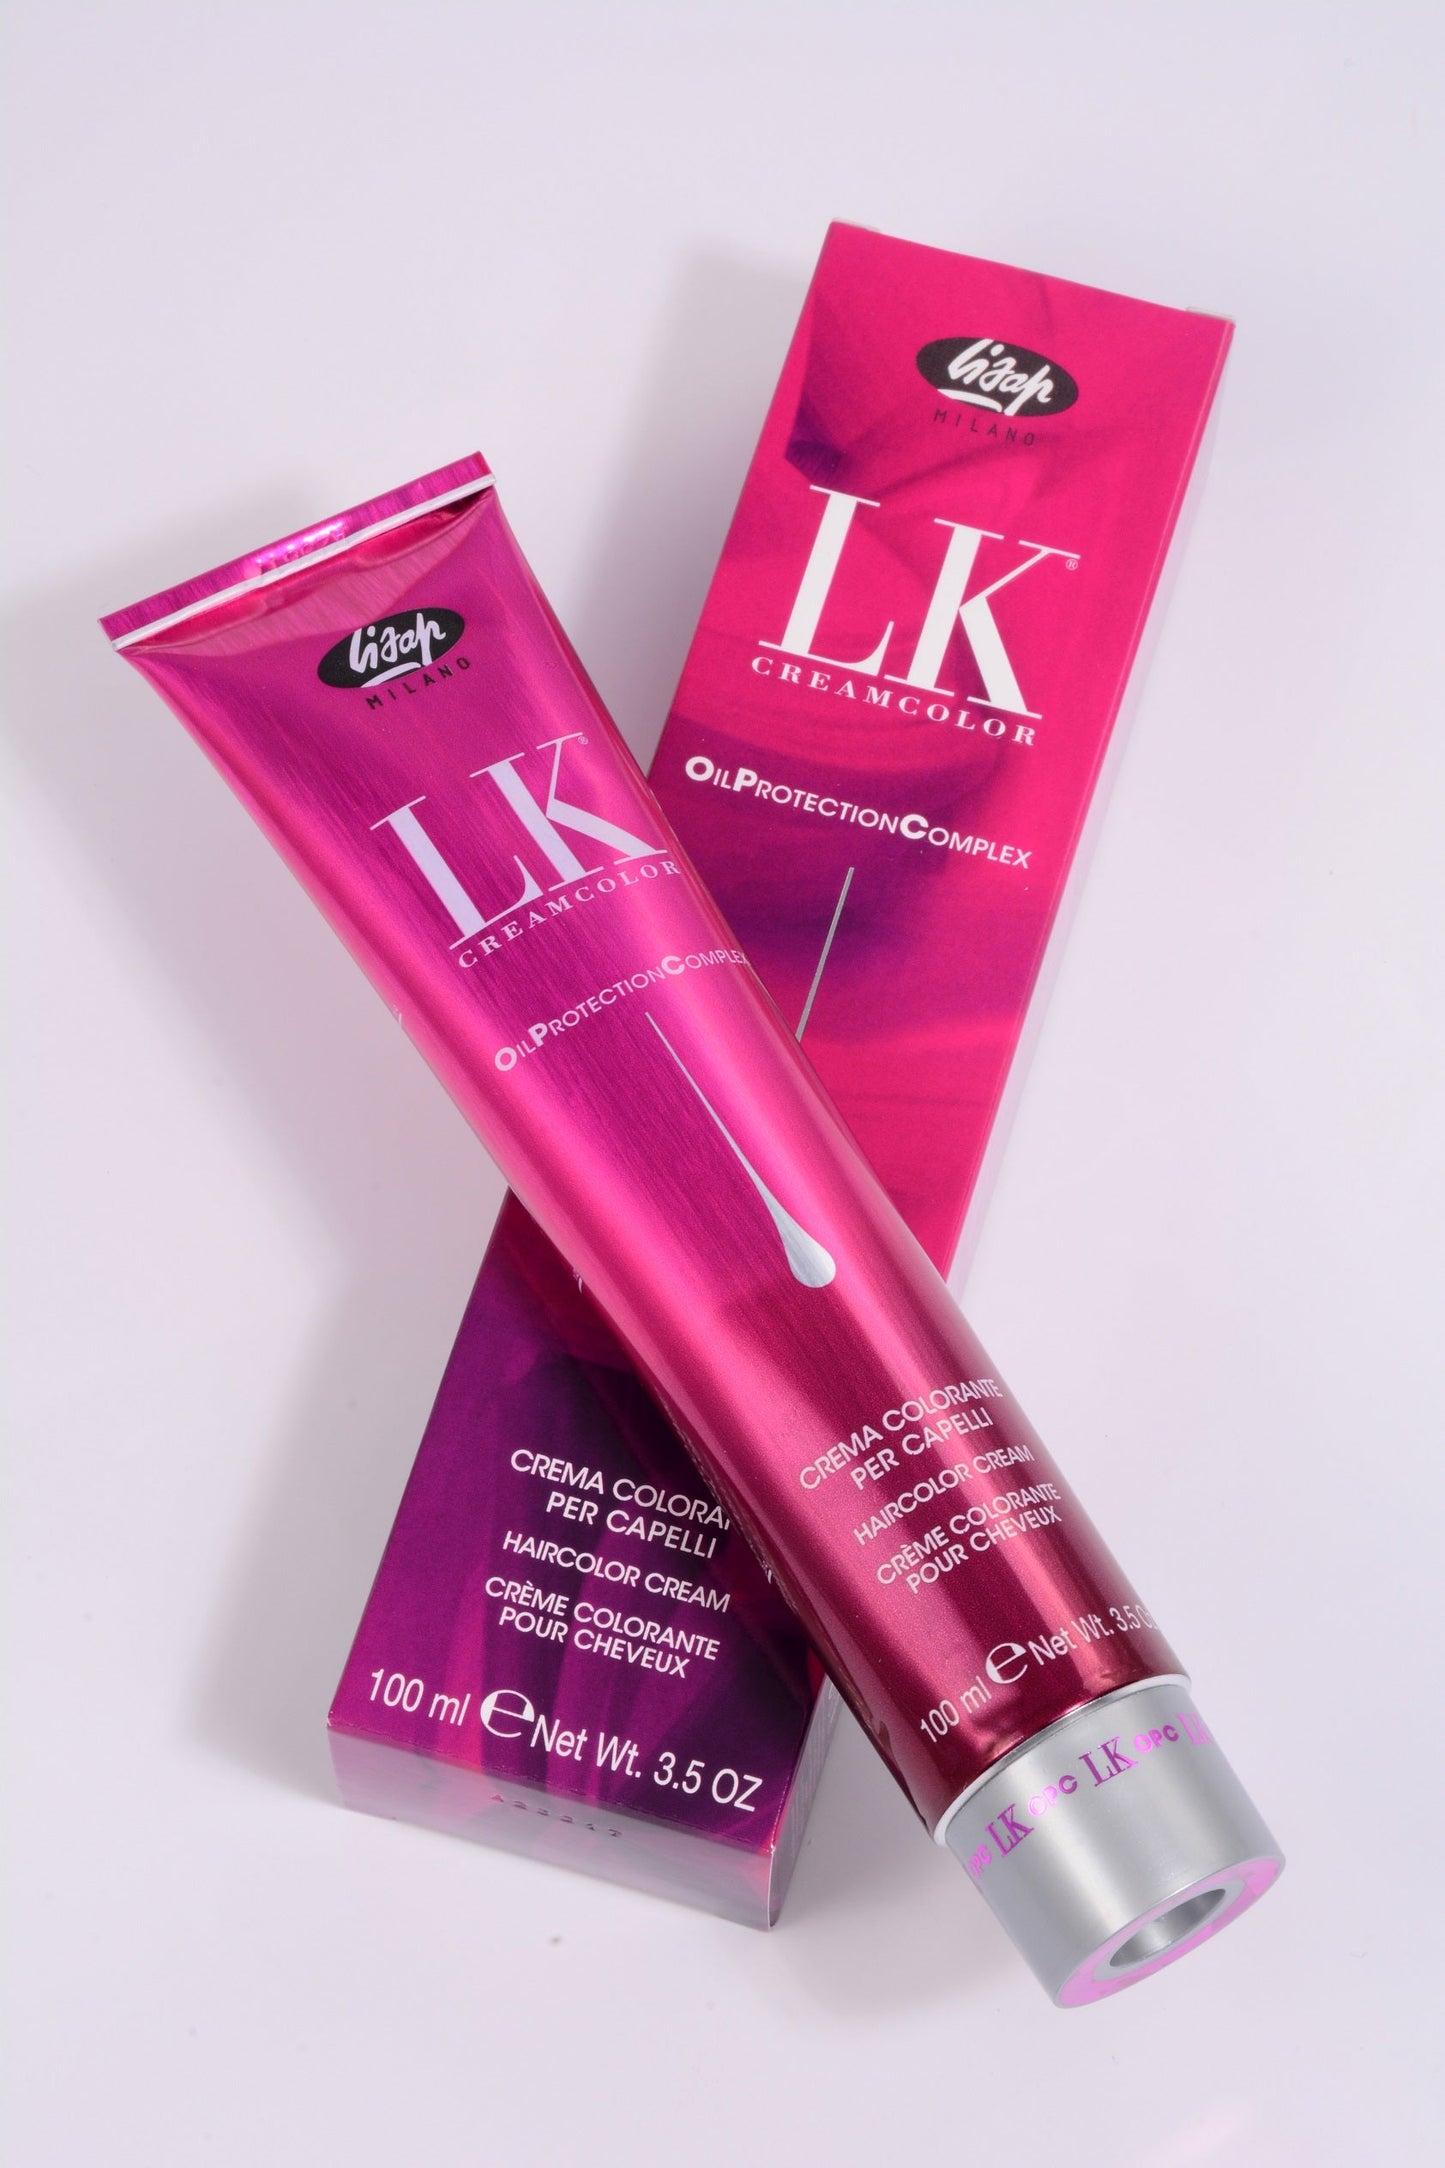 LK Creamcolor 10/82 Oil Protection Complex